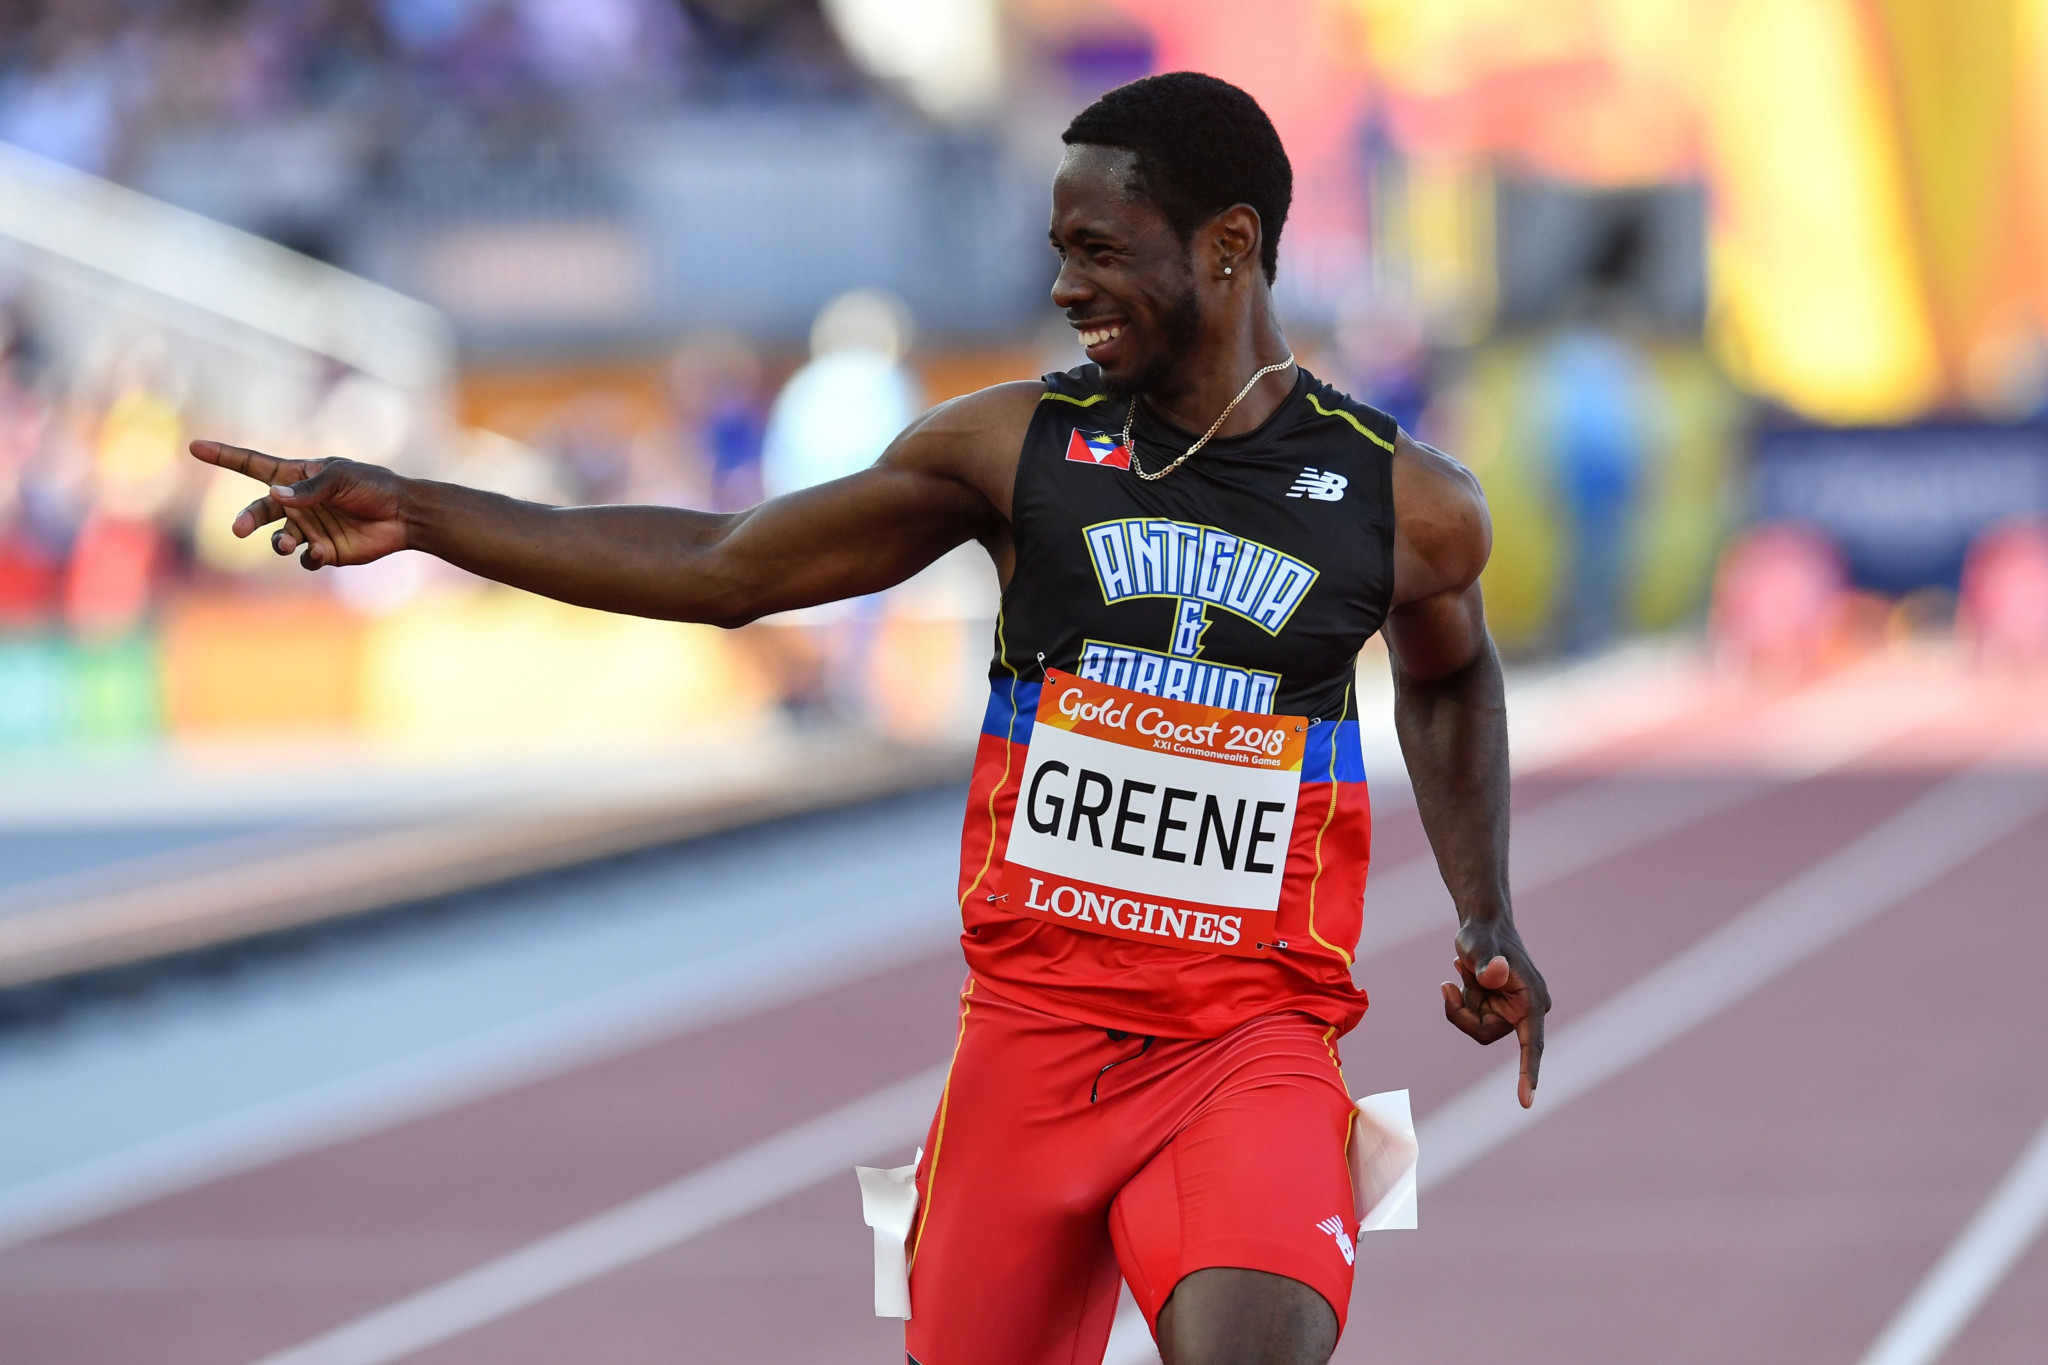 Double Olympic sprinter Cejhae Greene is a hope for Antigua and Barbuda ©Getty Images